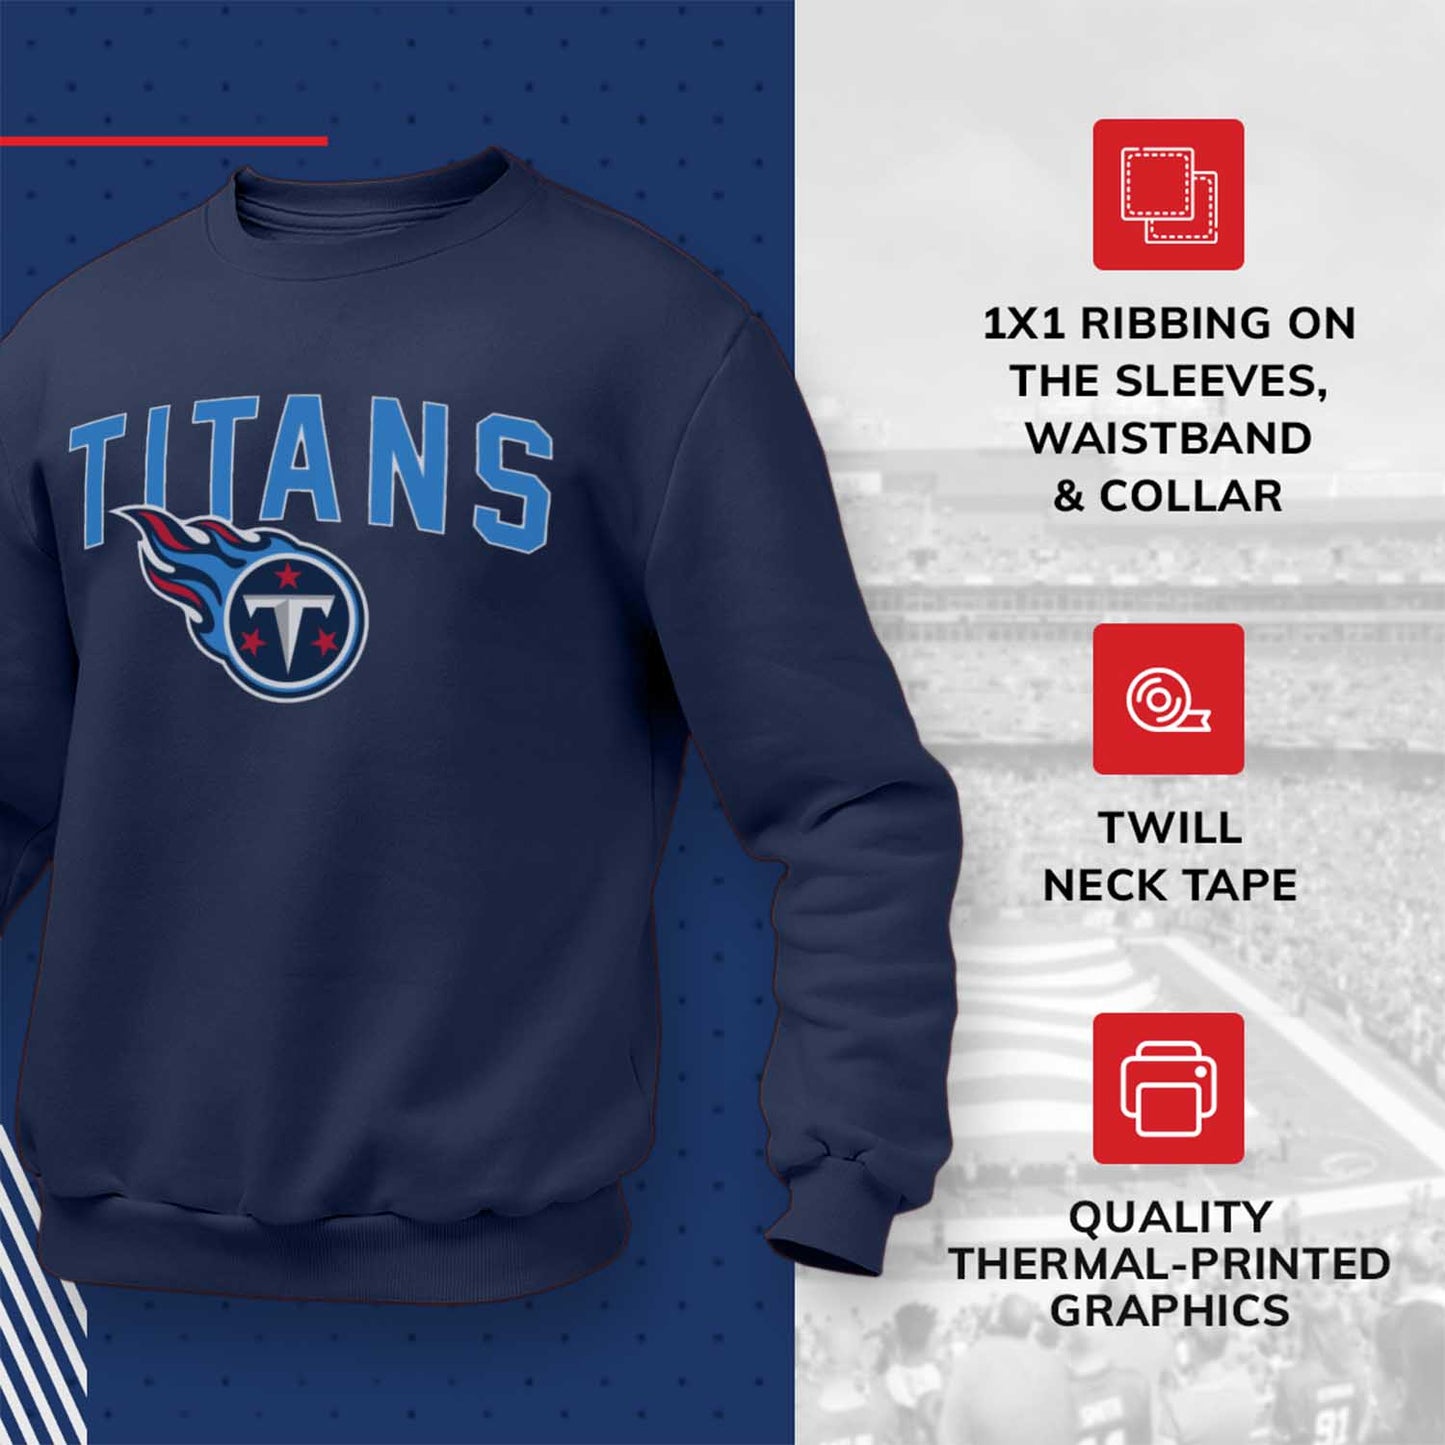 Tennessee Titans NFL Home Team Crew - Navy